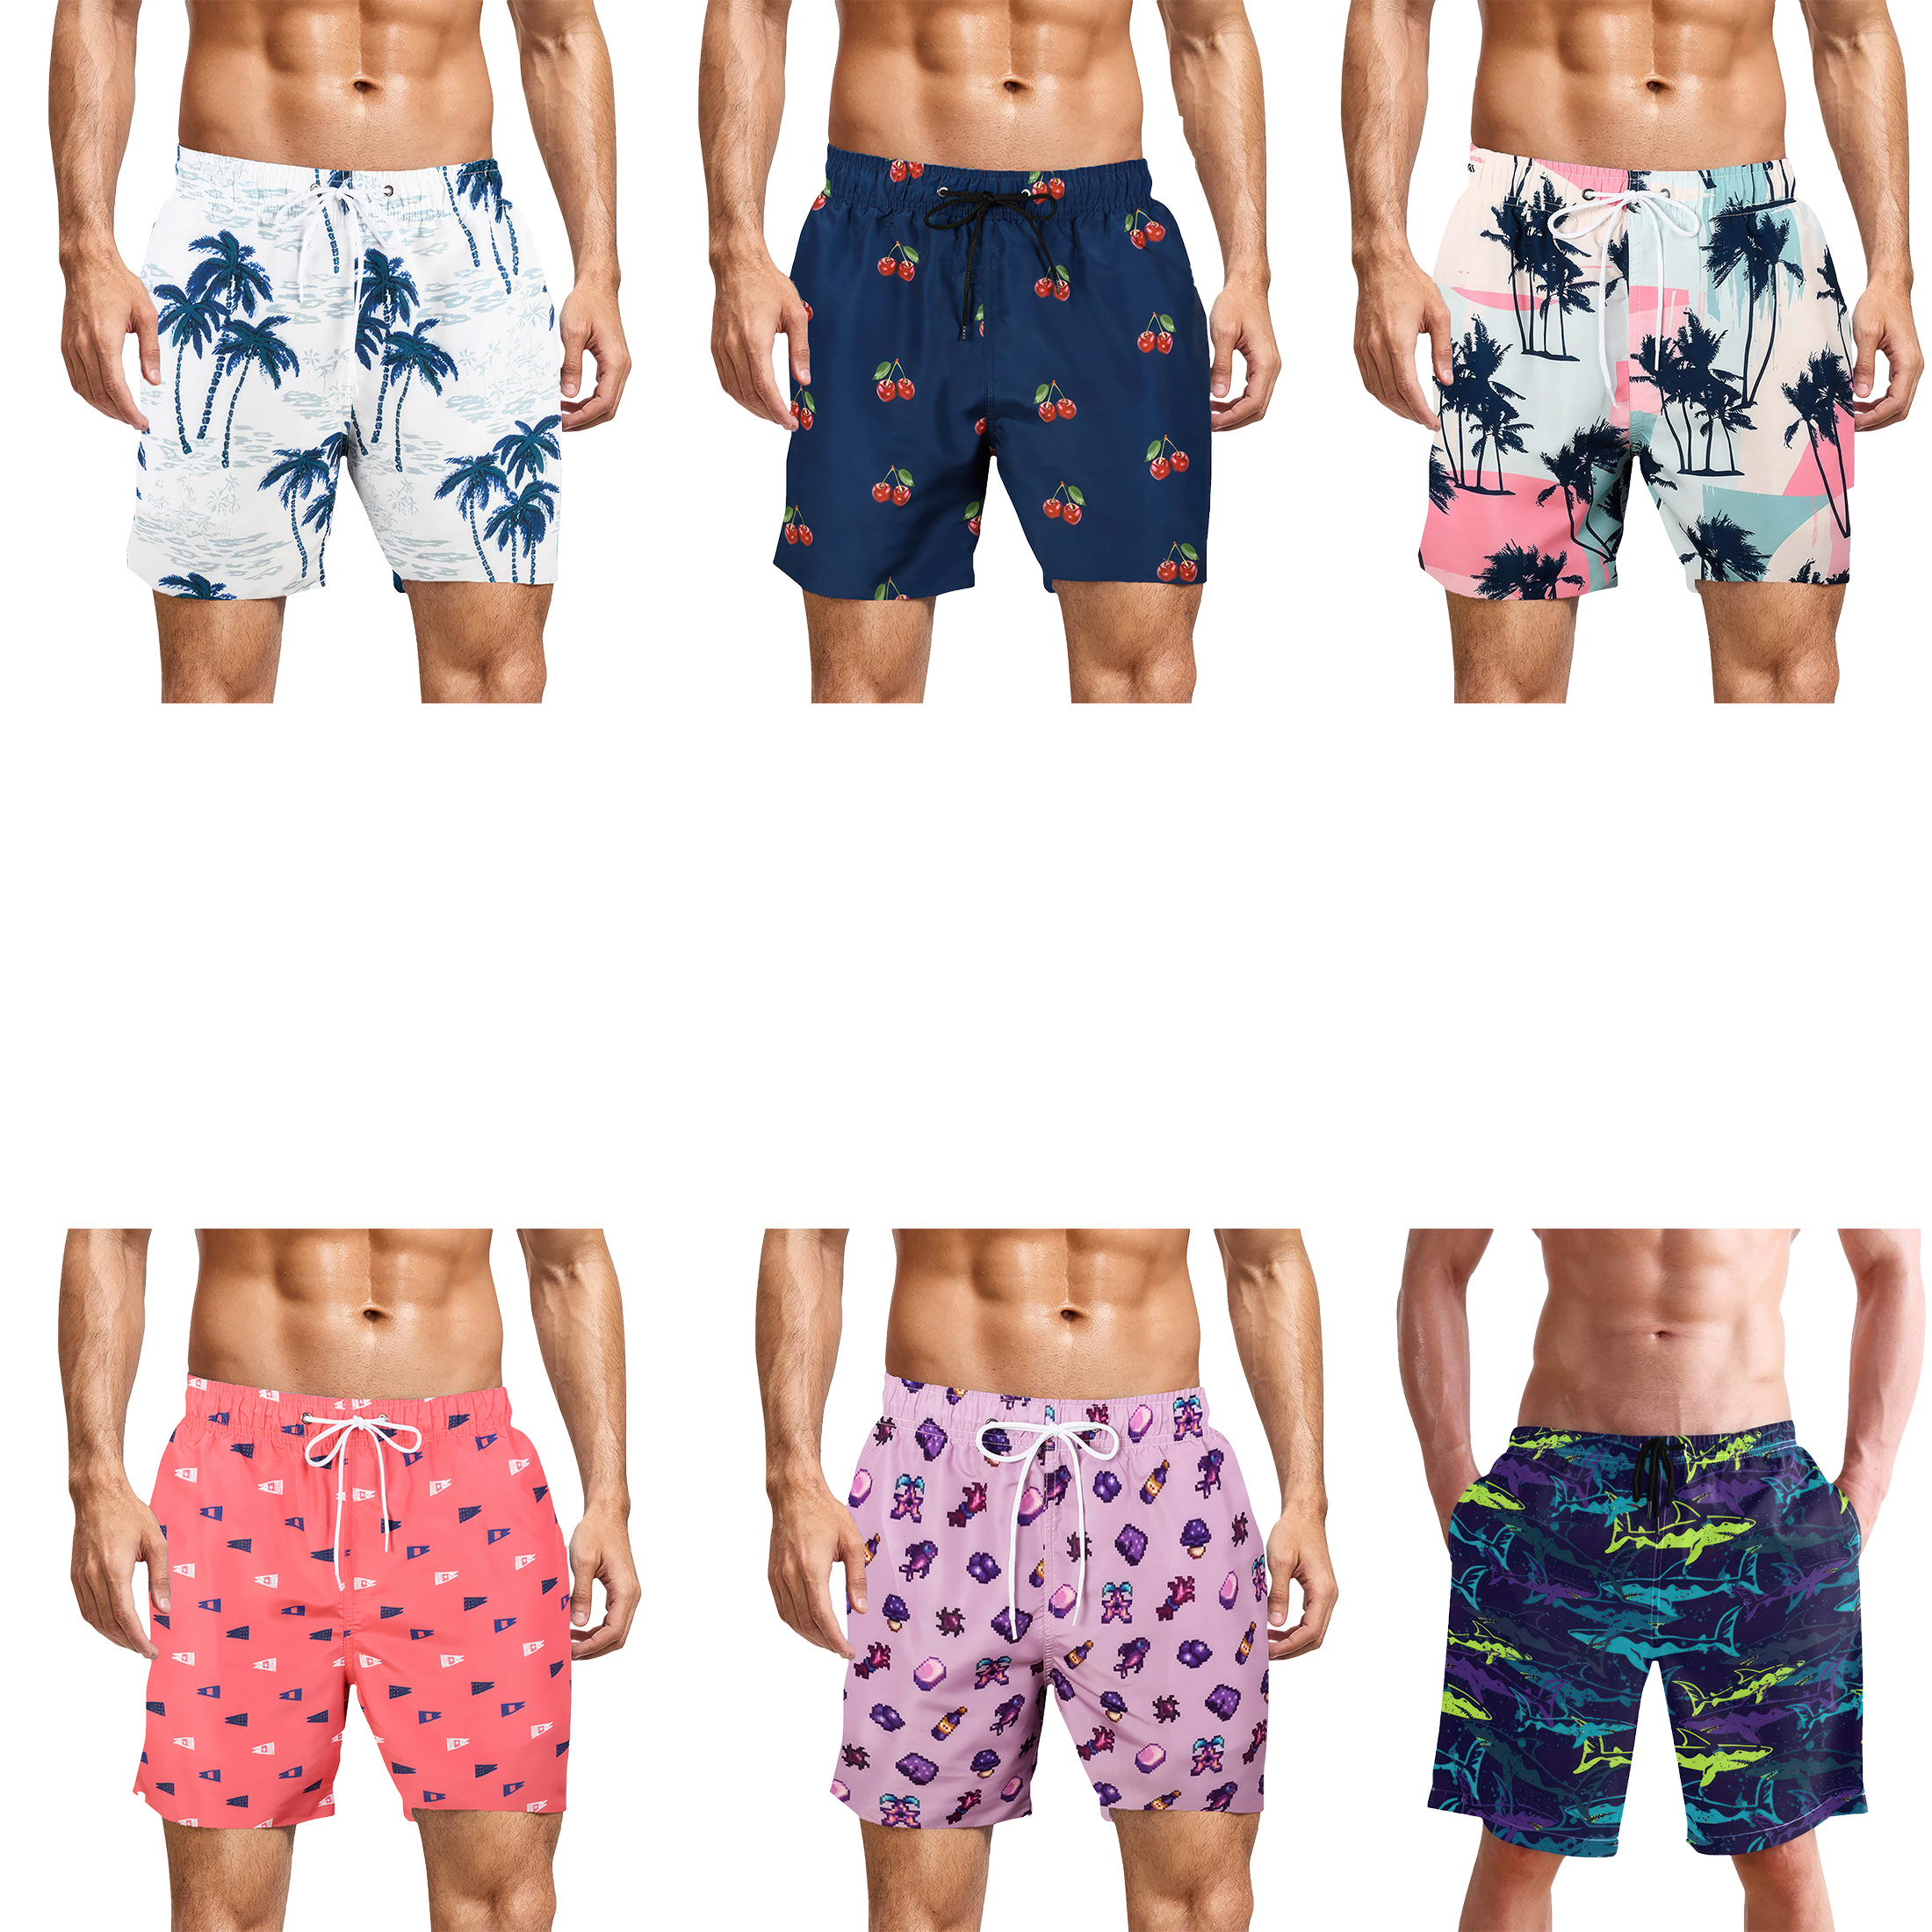 3-Pack Men's Printed Swim Shorts With Pockets Quick Dry Beachwear Bathing Suits Board Trunks - L